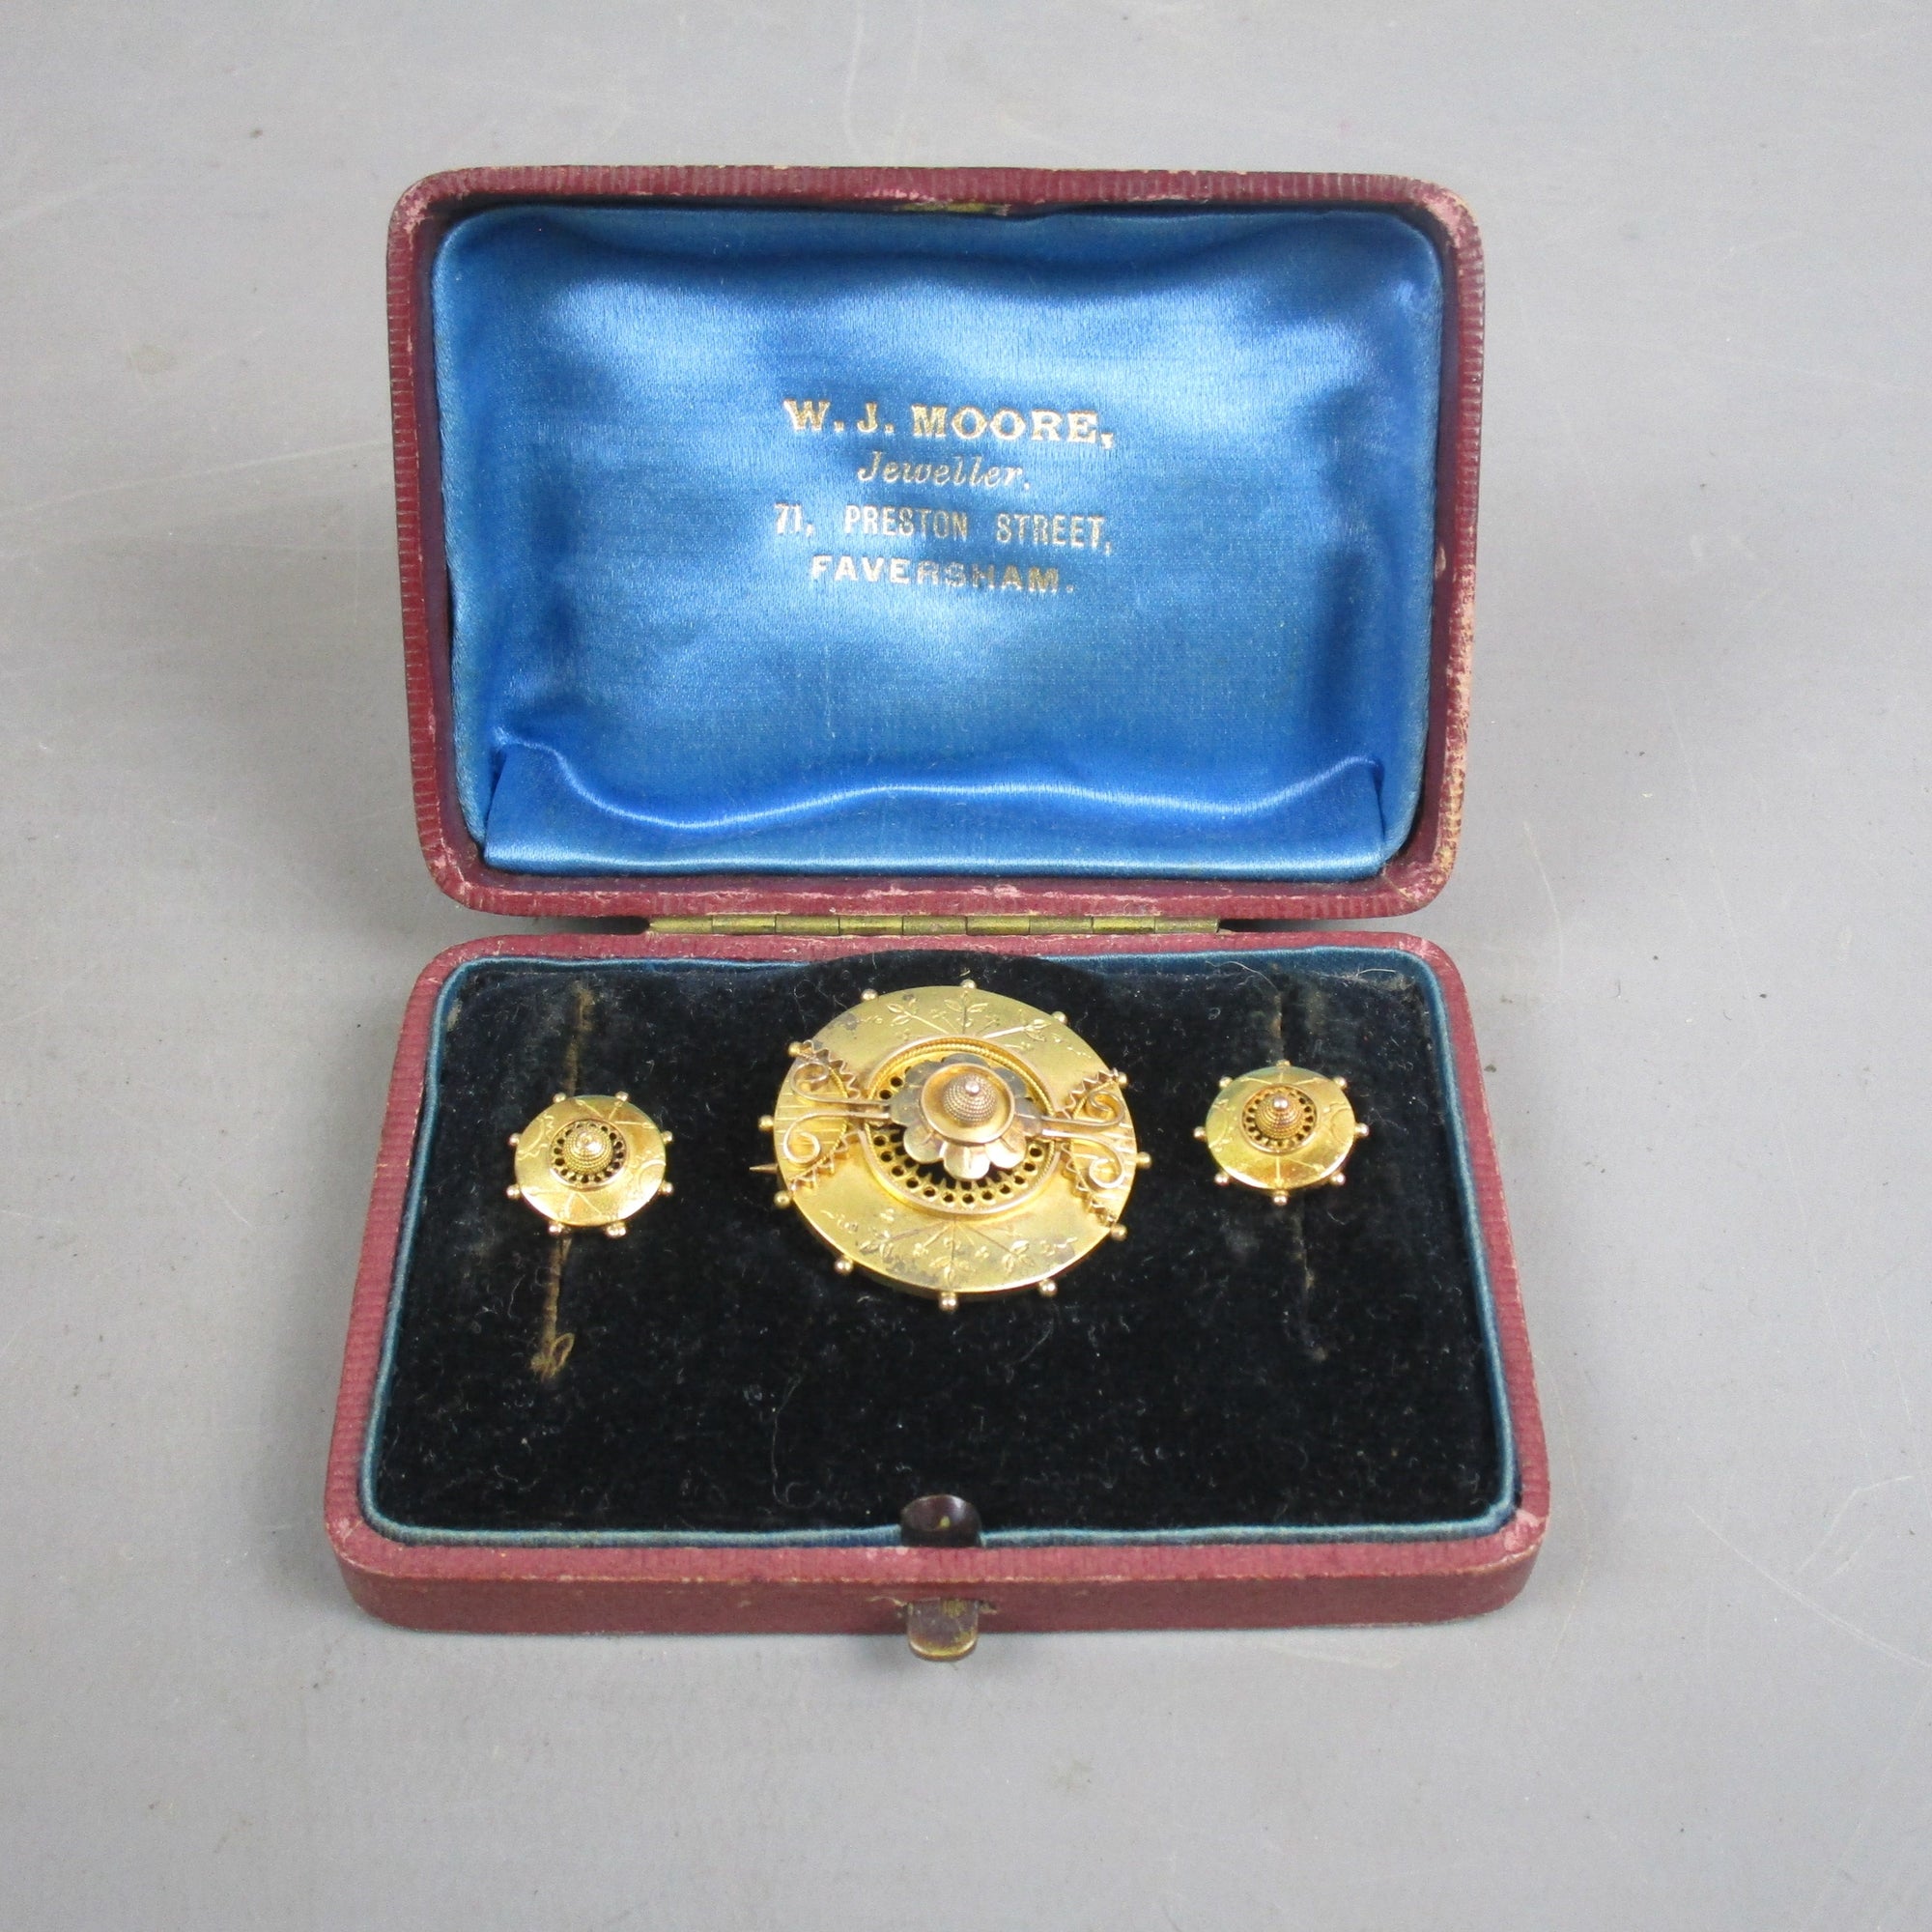 18ct Gold Brooch & Earring Set With Original Box Antique Victorian c1870